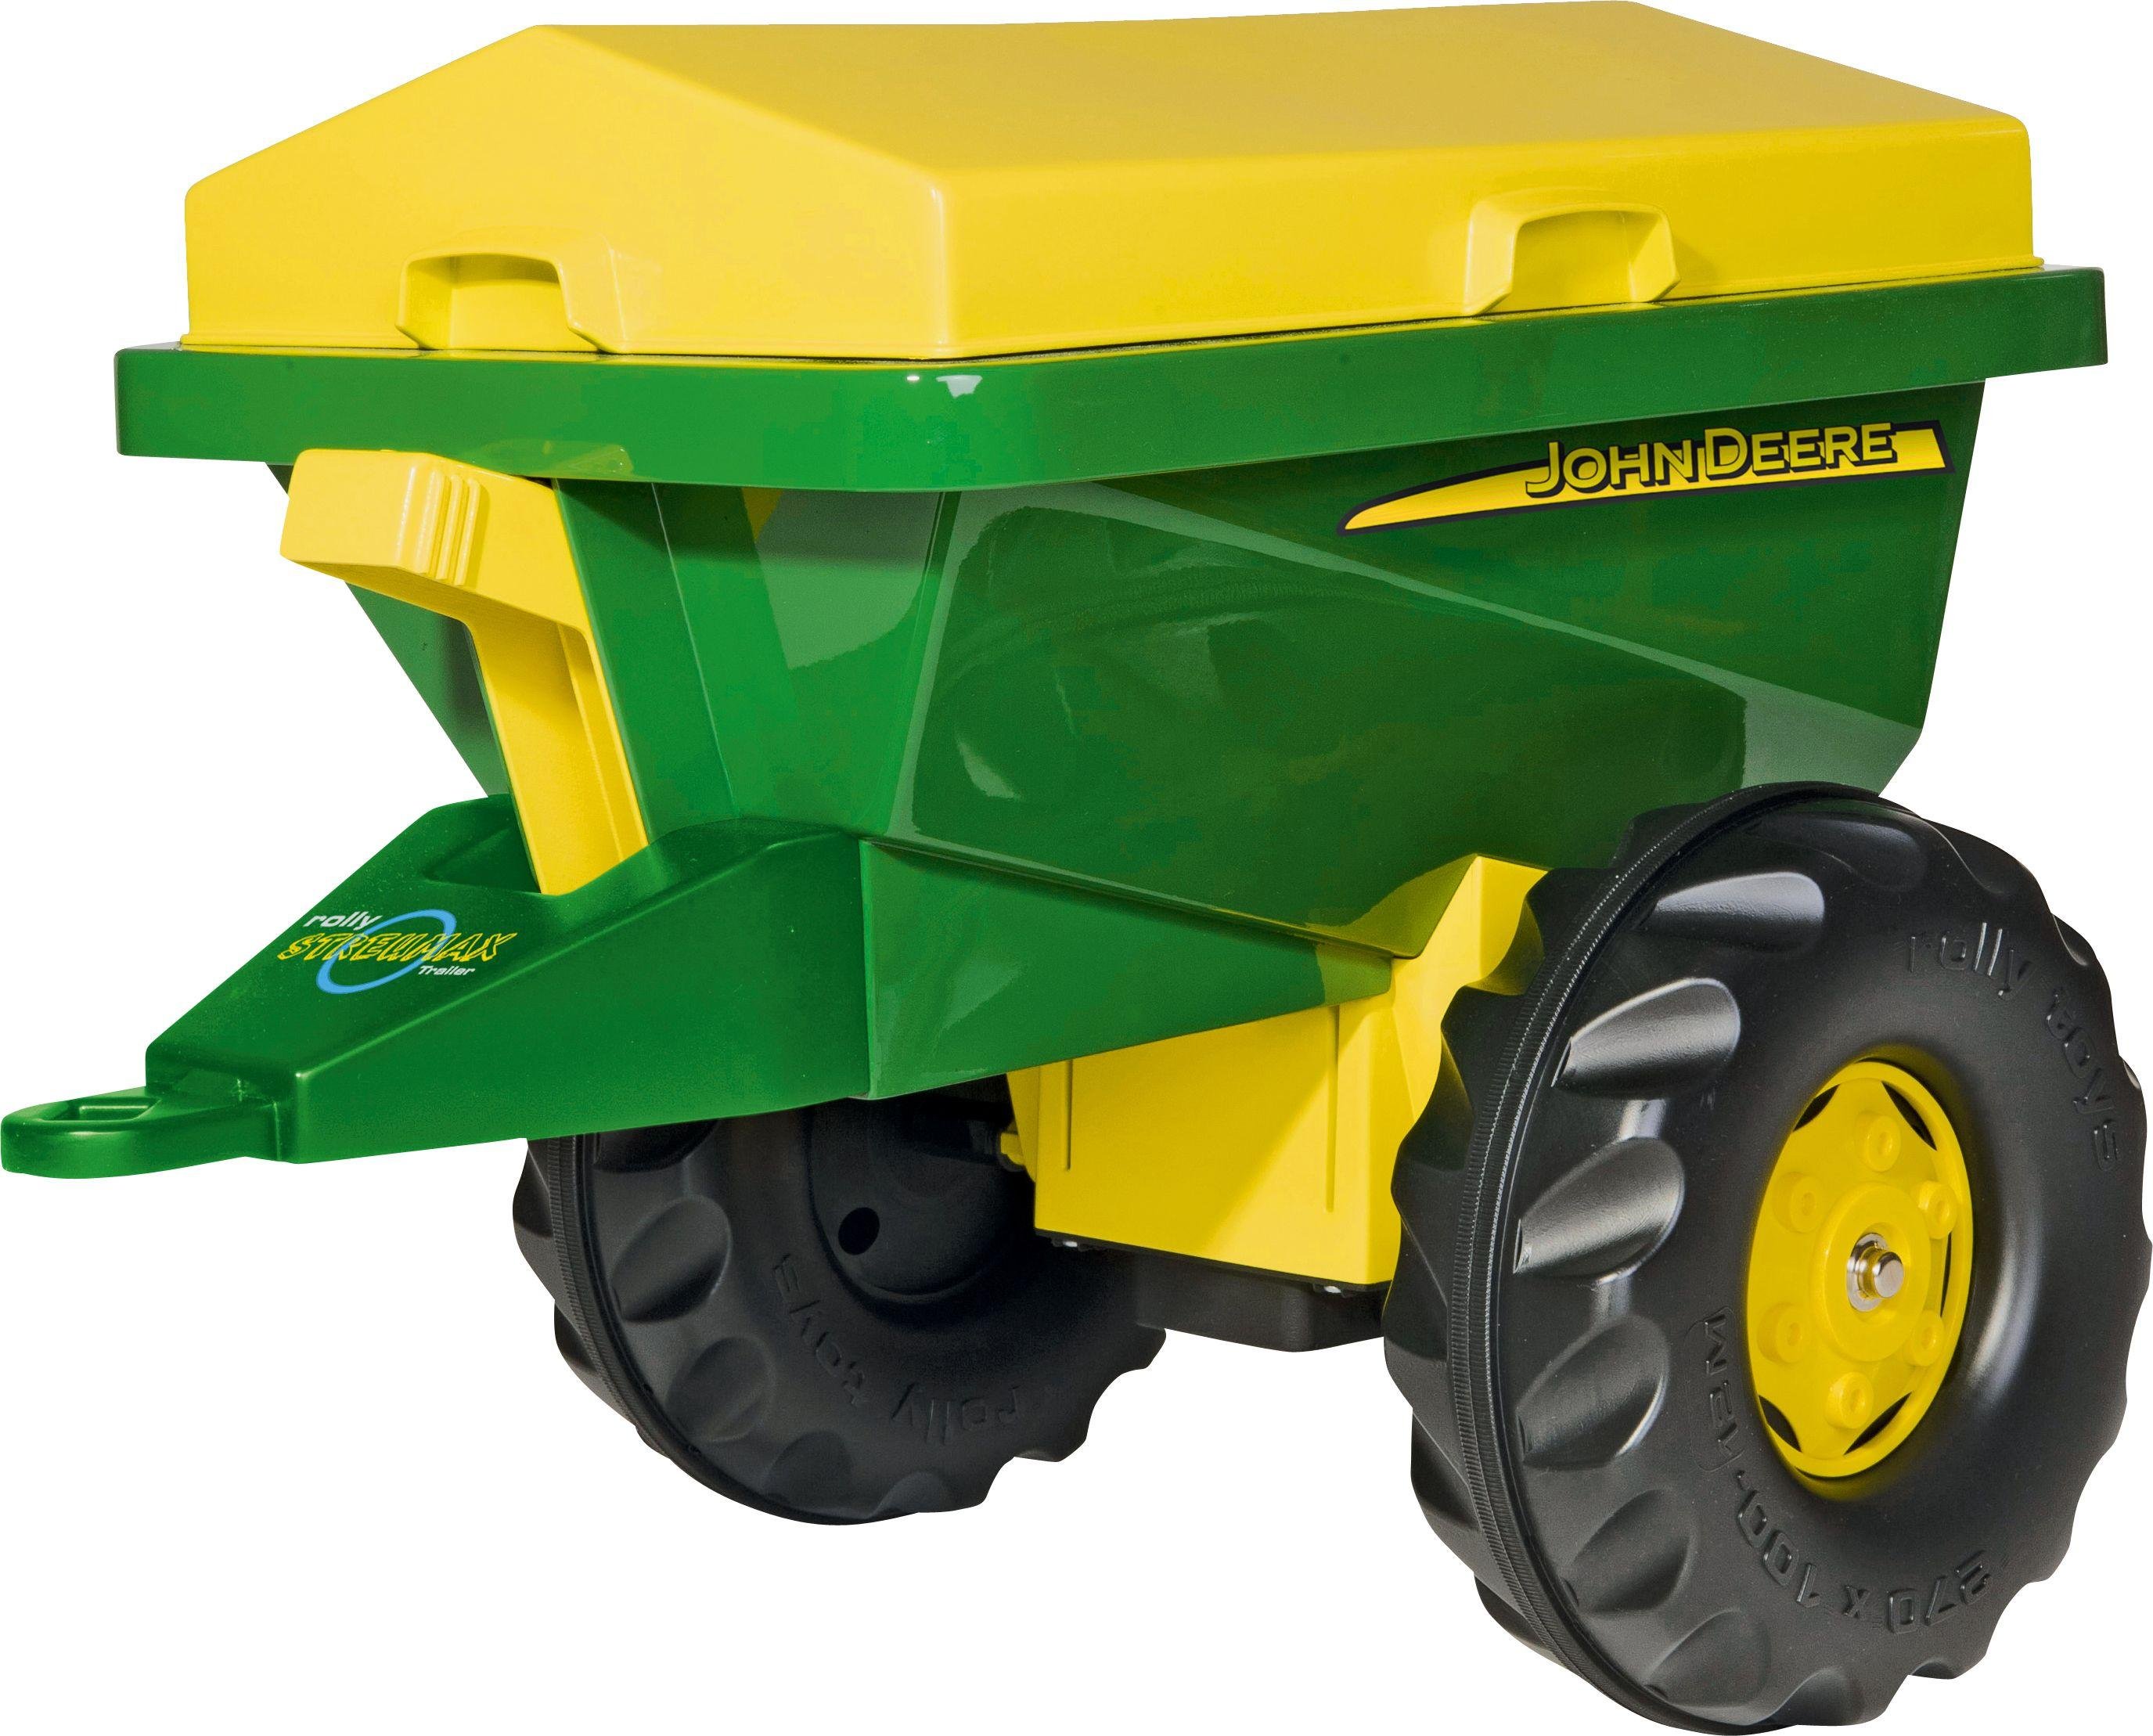 John Deere Spreader for Child's Tractor. Review